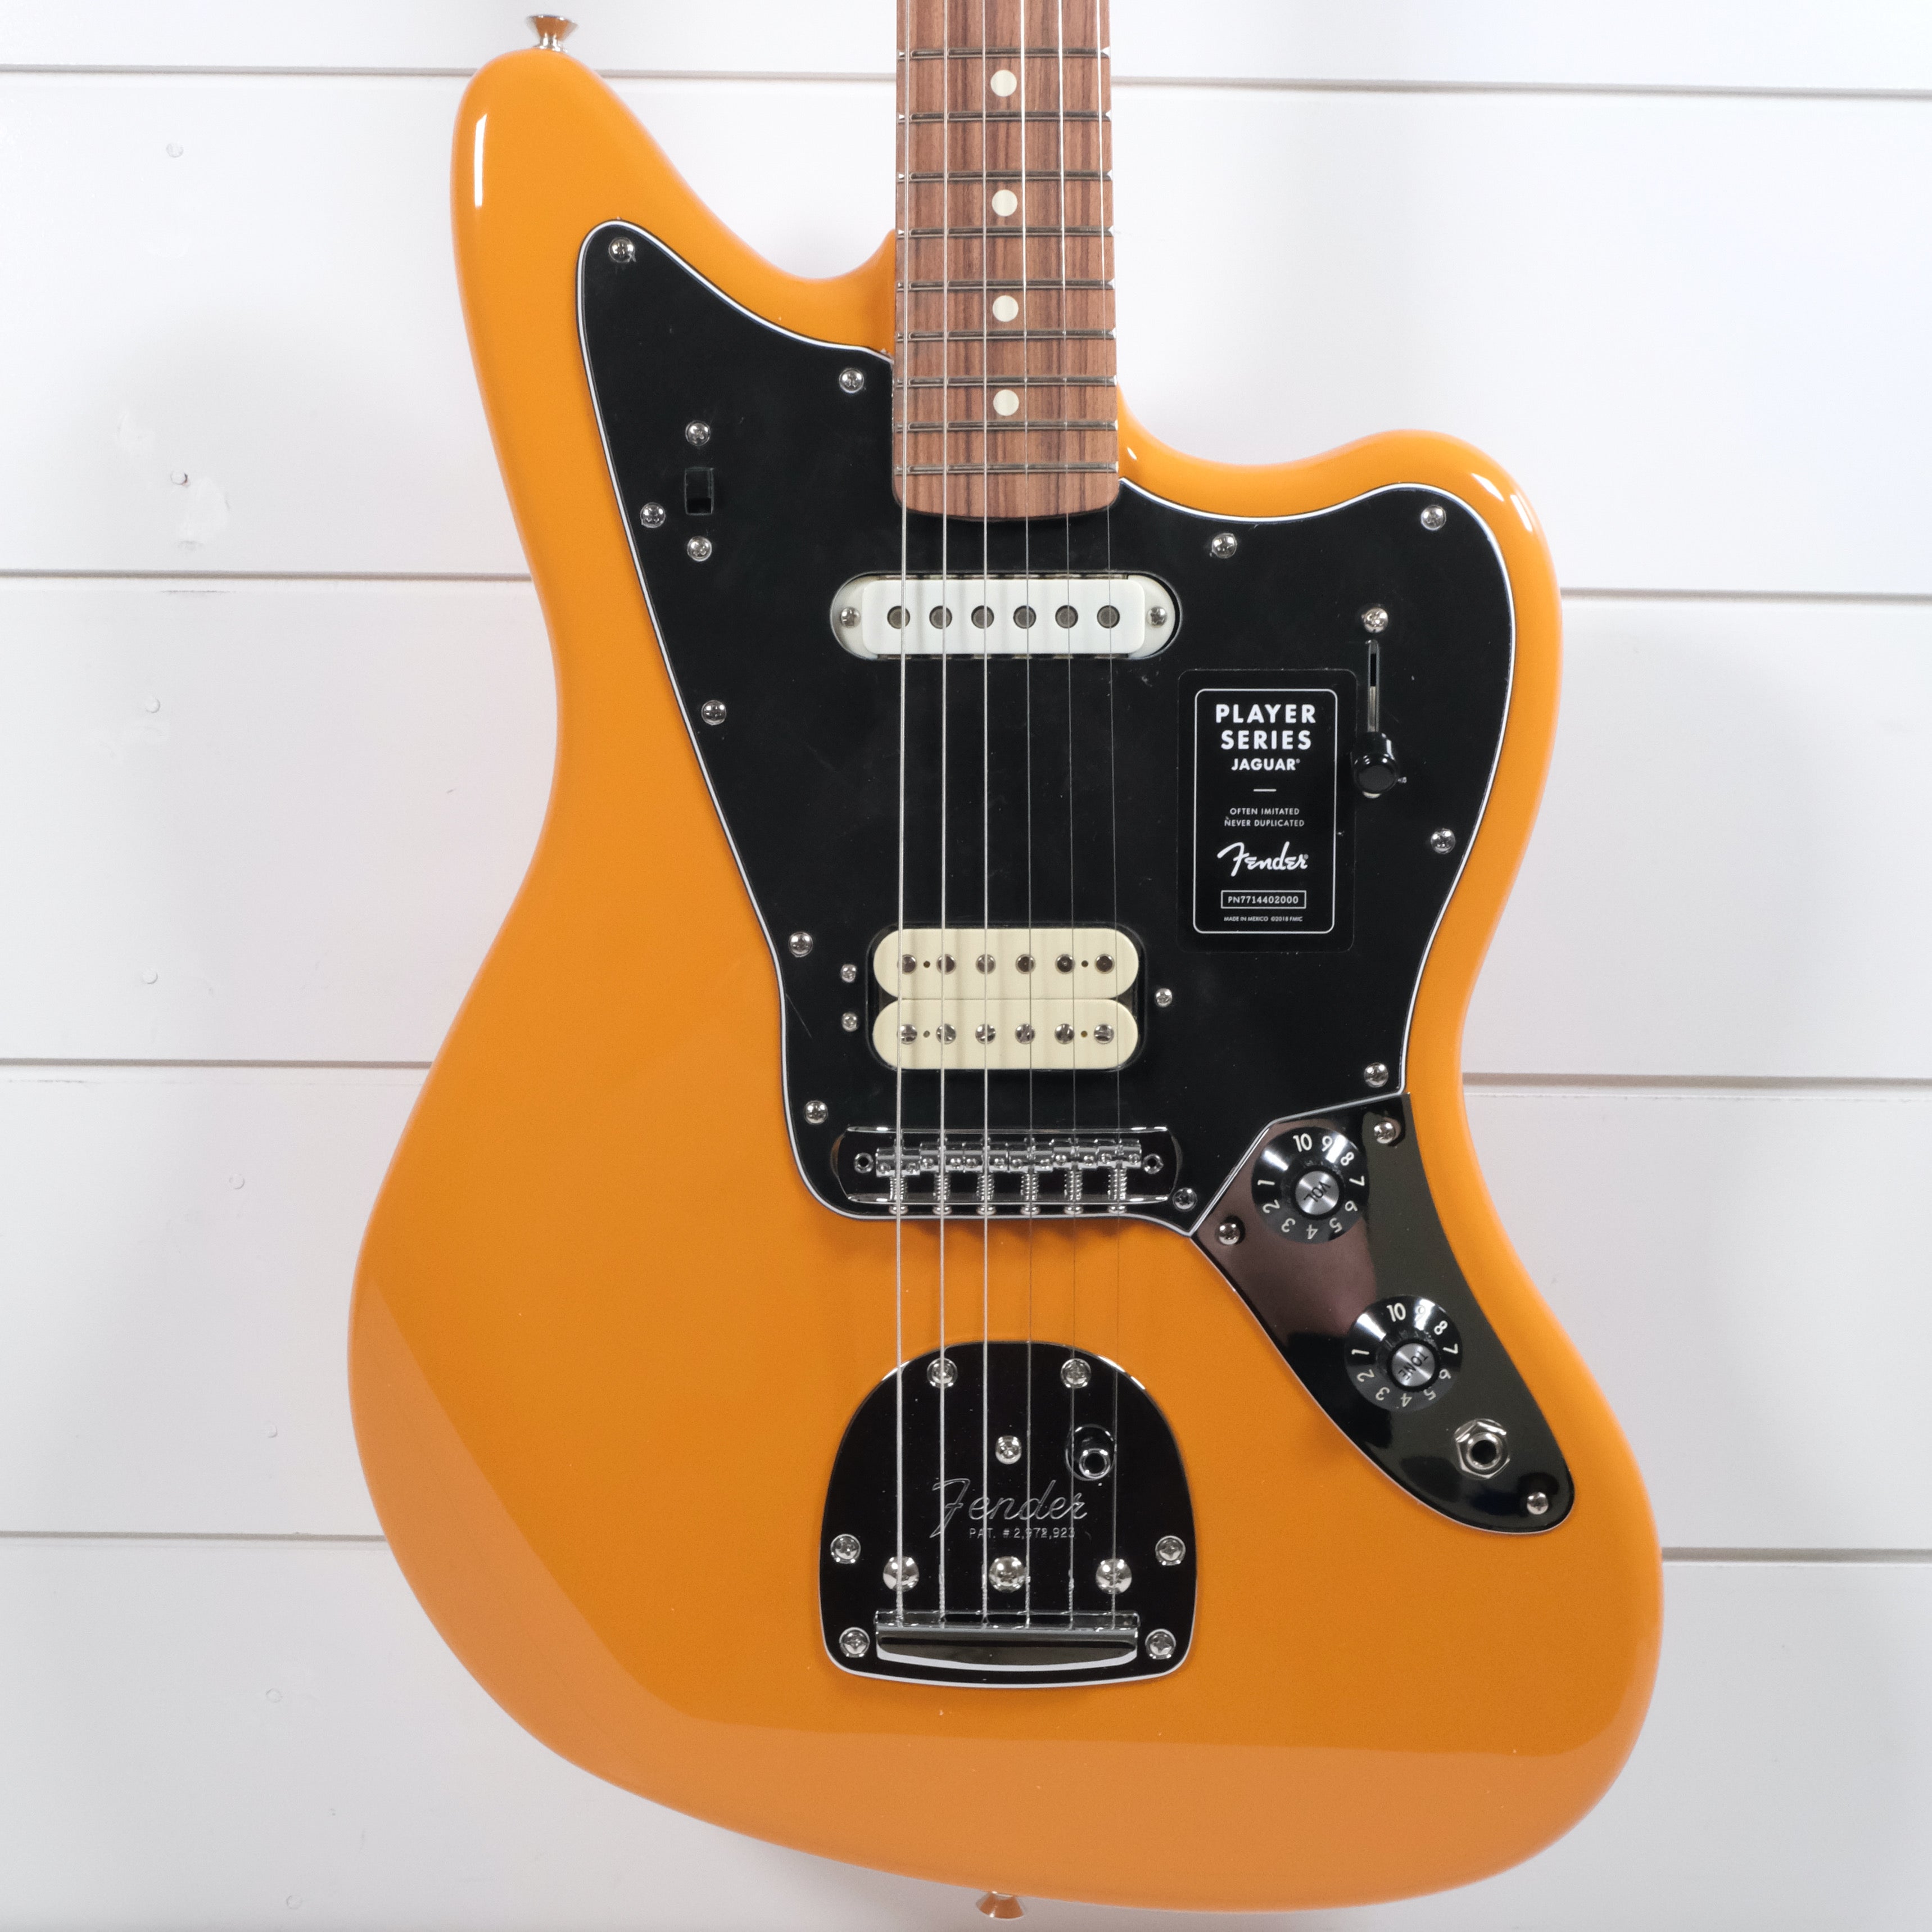 Fender player Jaguar Made in mexico - ギター